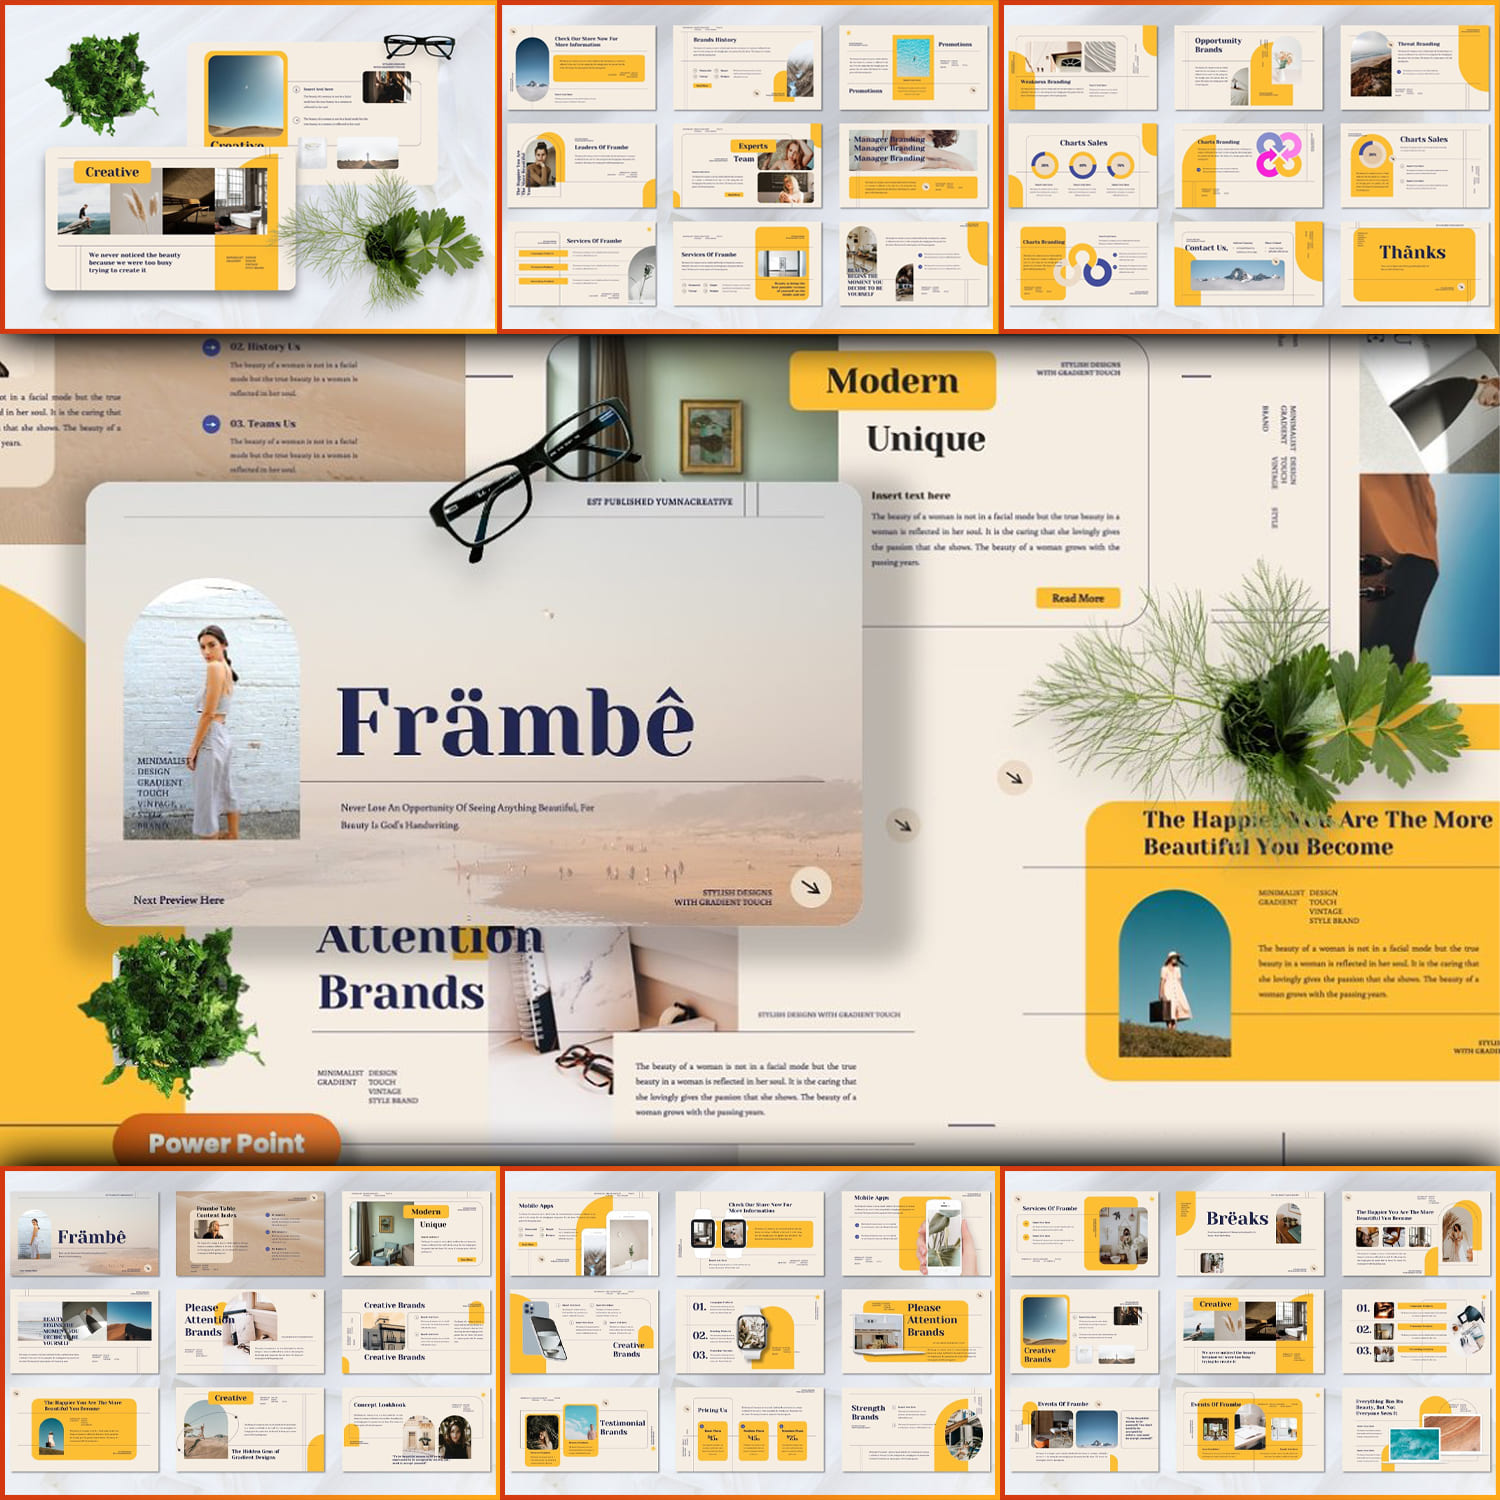 Frambe - Creative Brands Powerpoint main image preview.